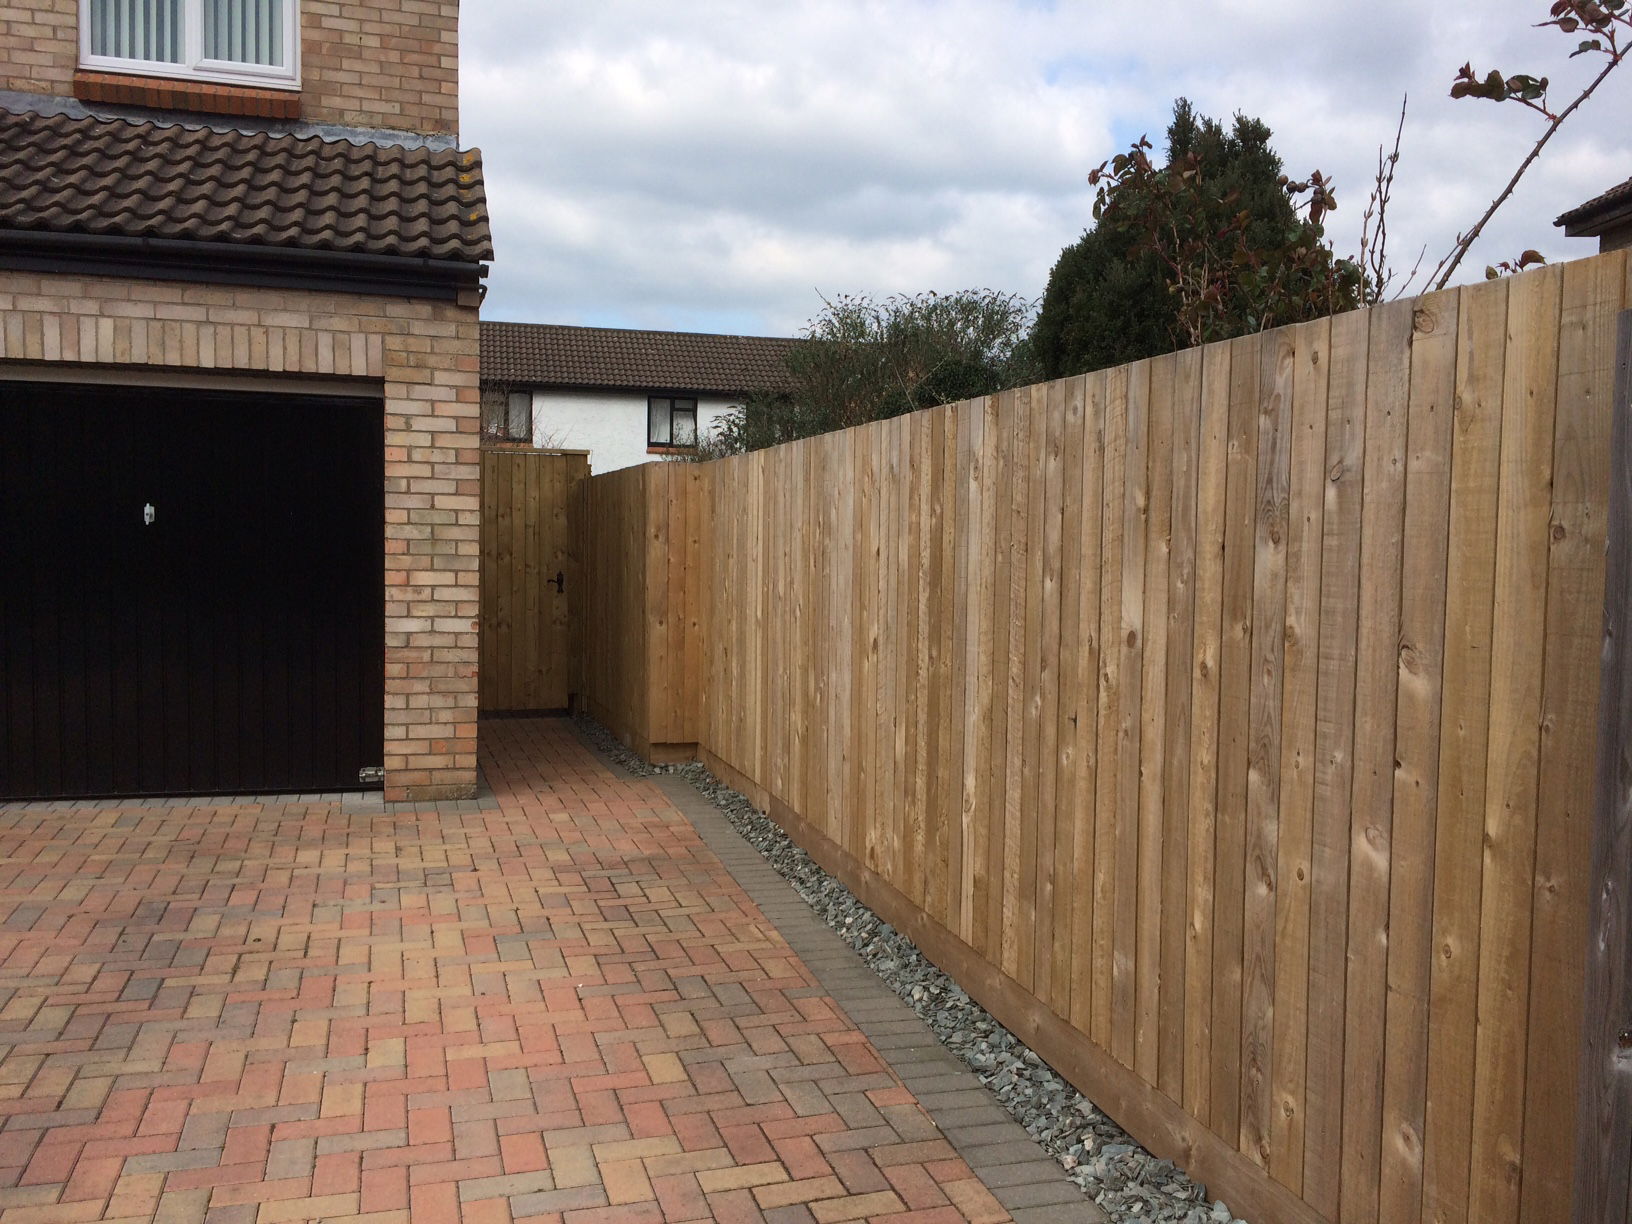 Feather edge fencing and side gate to match